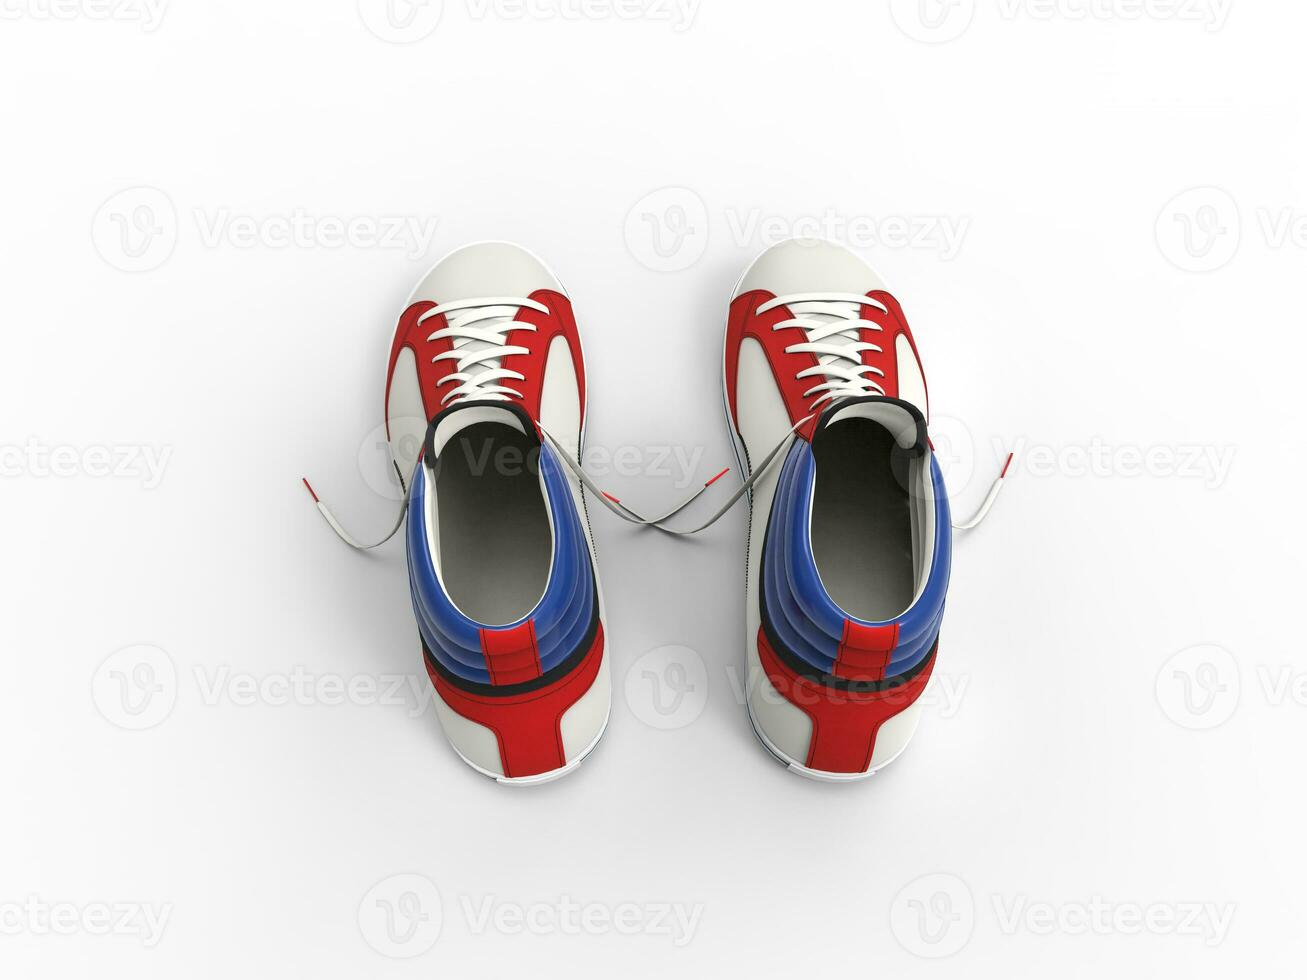 Pair of stylish modern sneakers - top view - isolated on white background photo